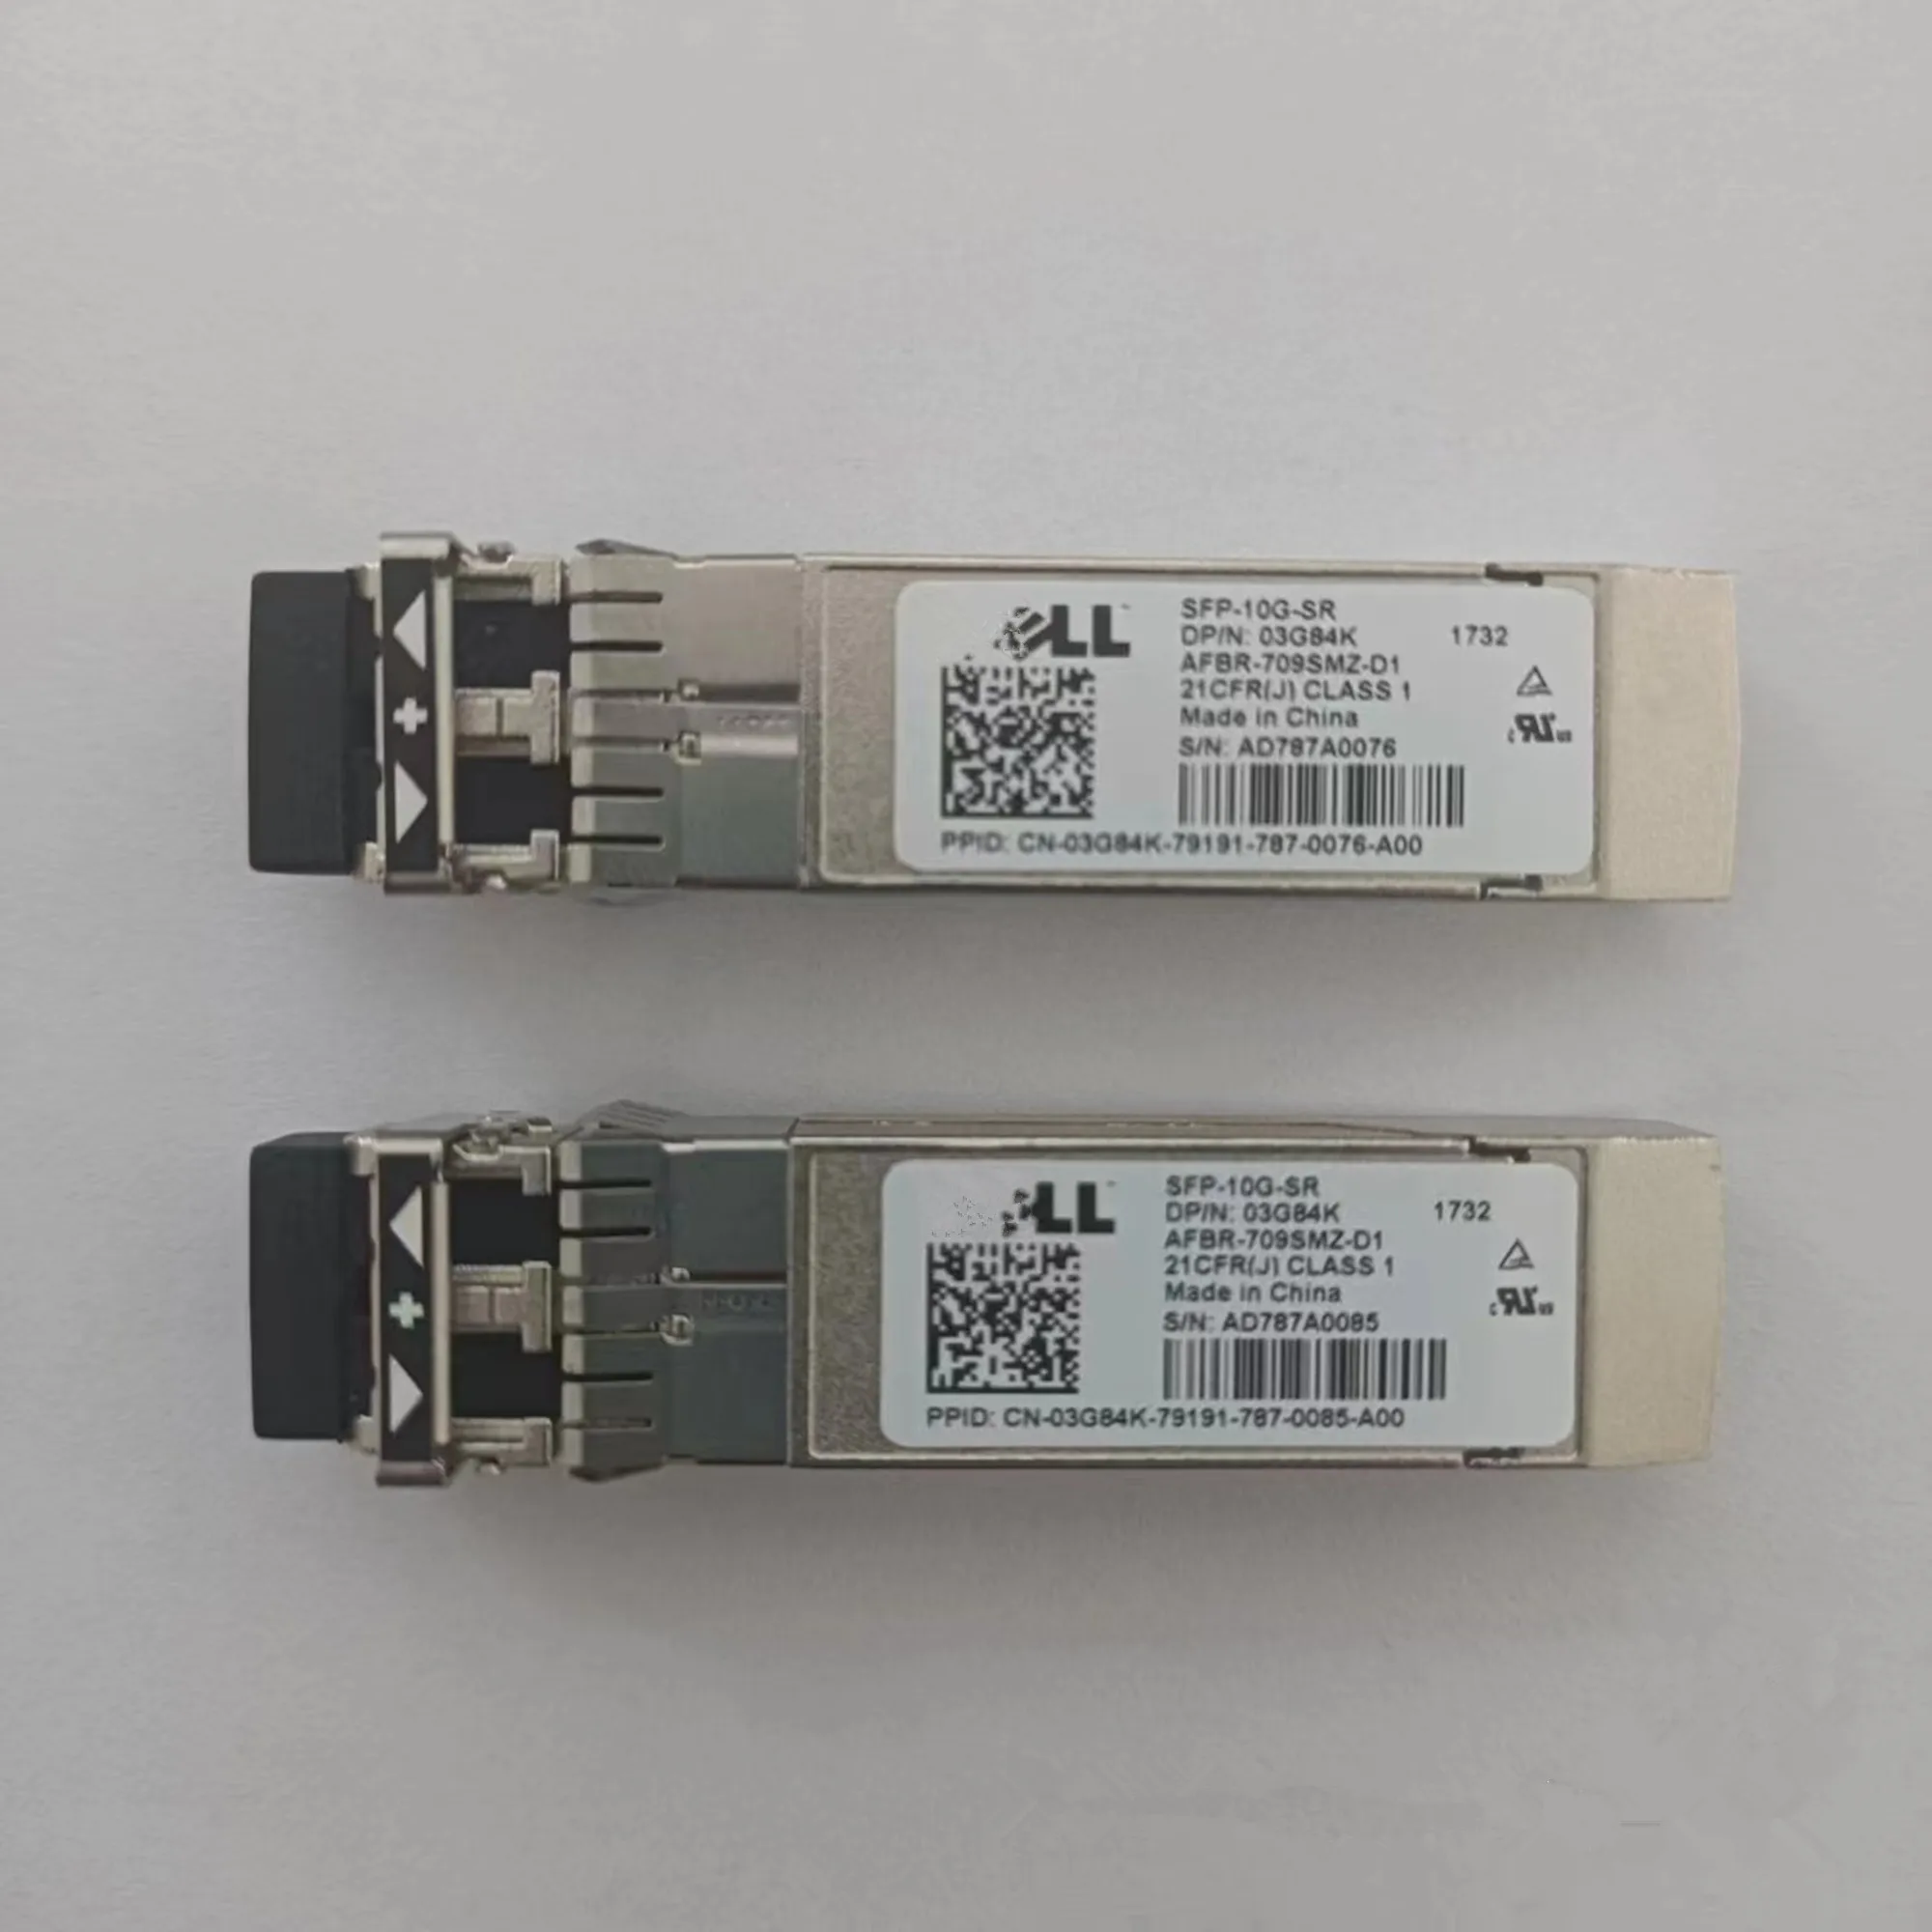 Del-I/AFBR-709SMZ-D1/03G84K/SFP-10G-SR/10Gbase-SR/850nm 300m 10g Transceiver/10g network adapter general switch